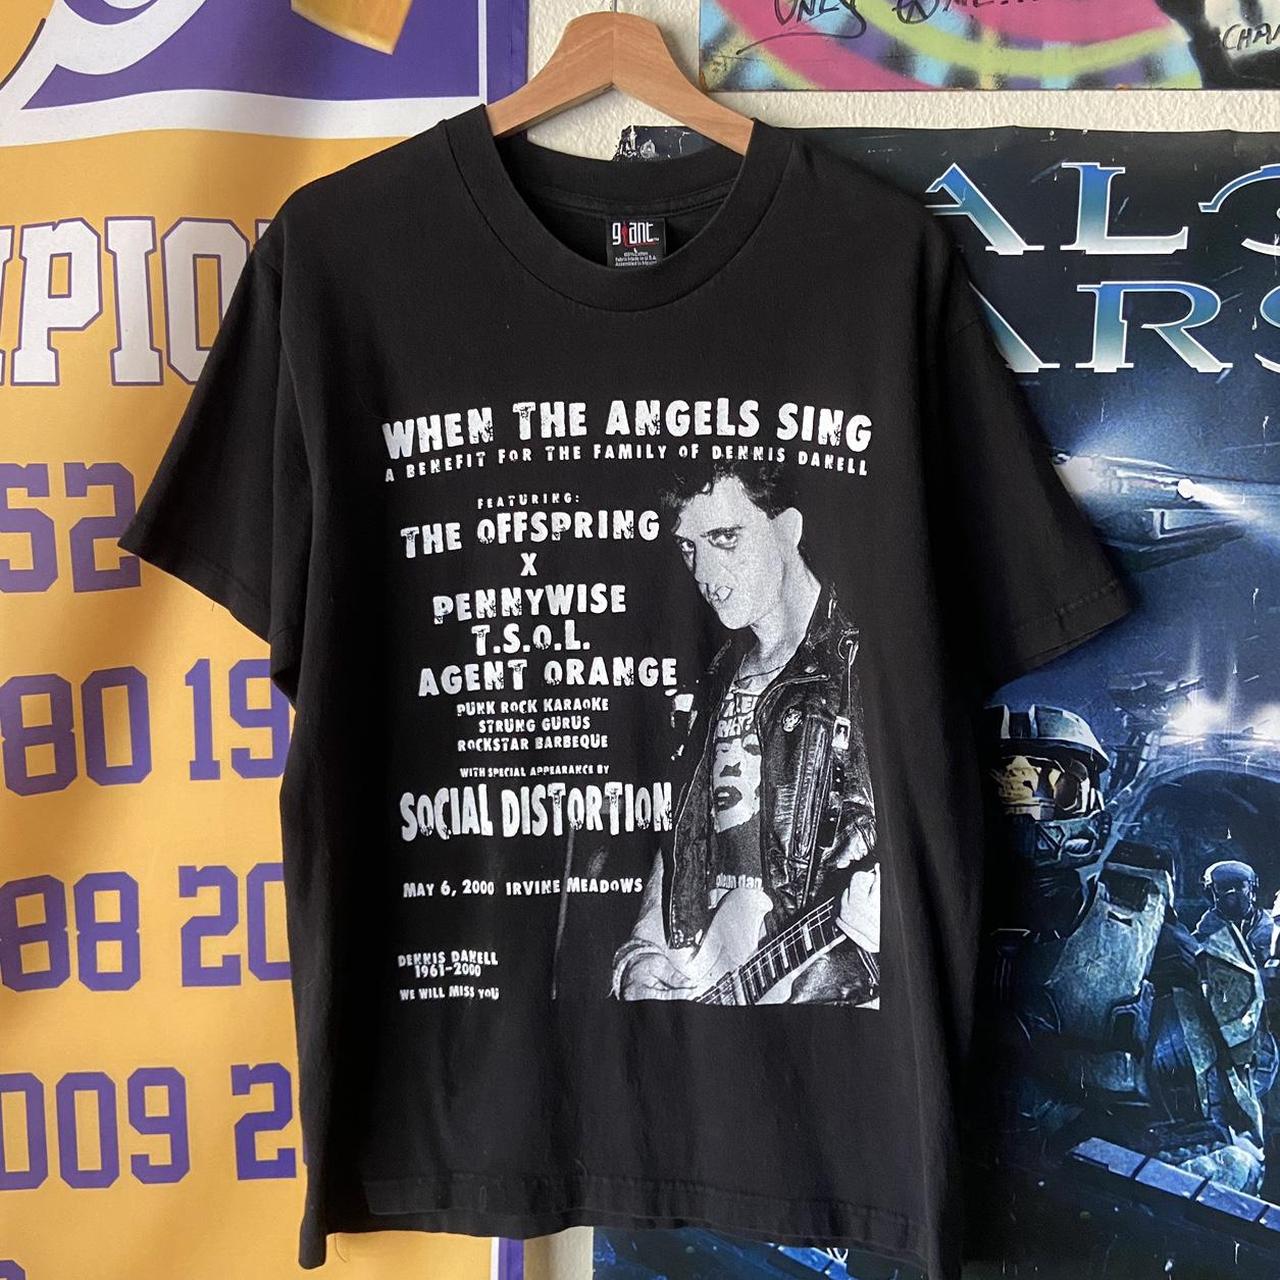 Rockstar made tee Size medium could fit a large - Depop